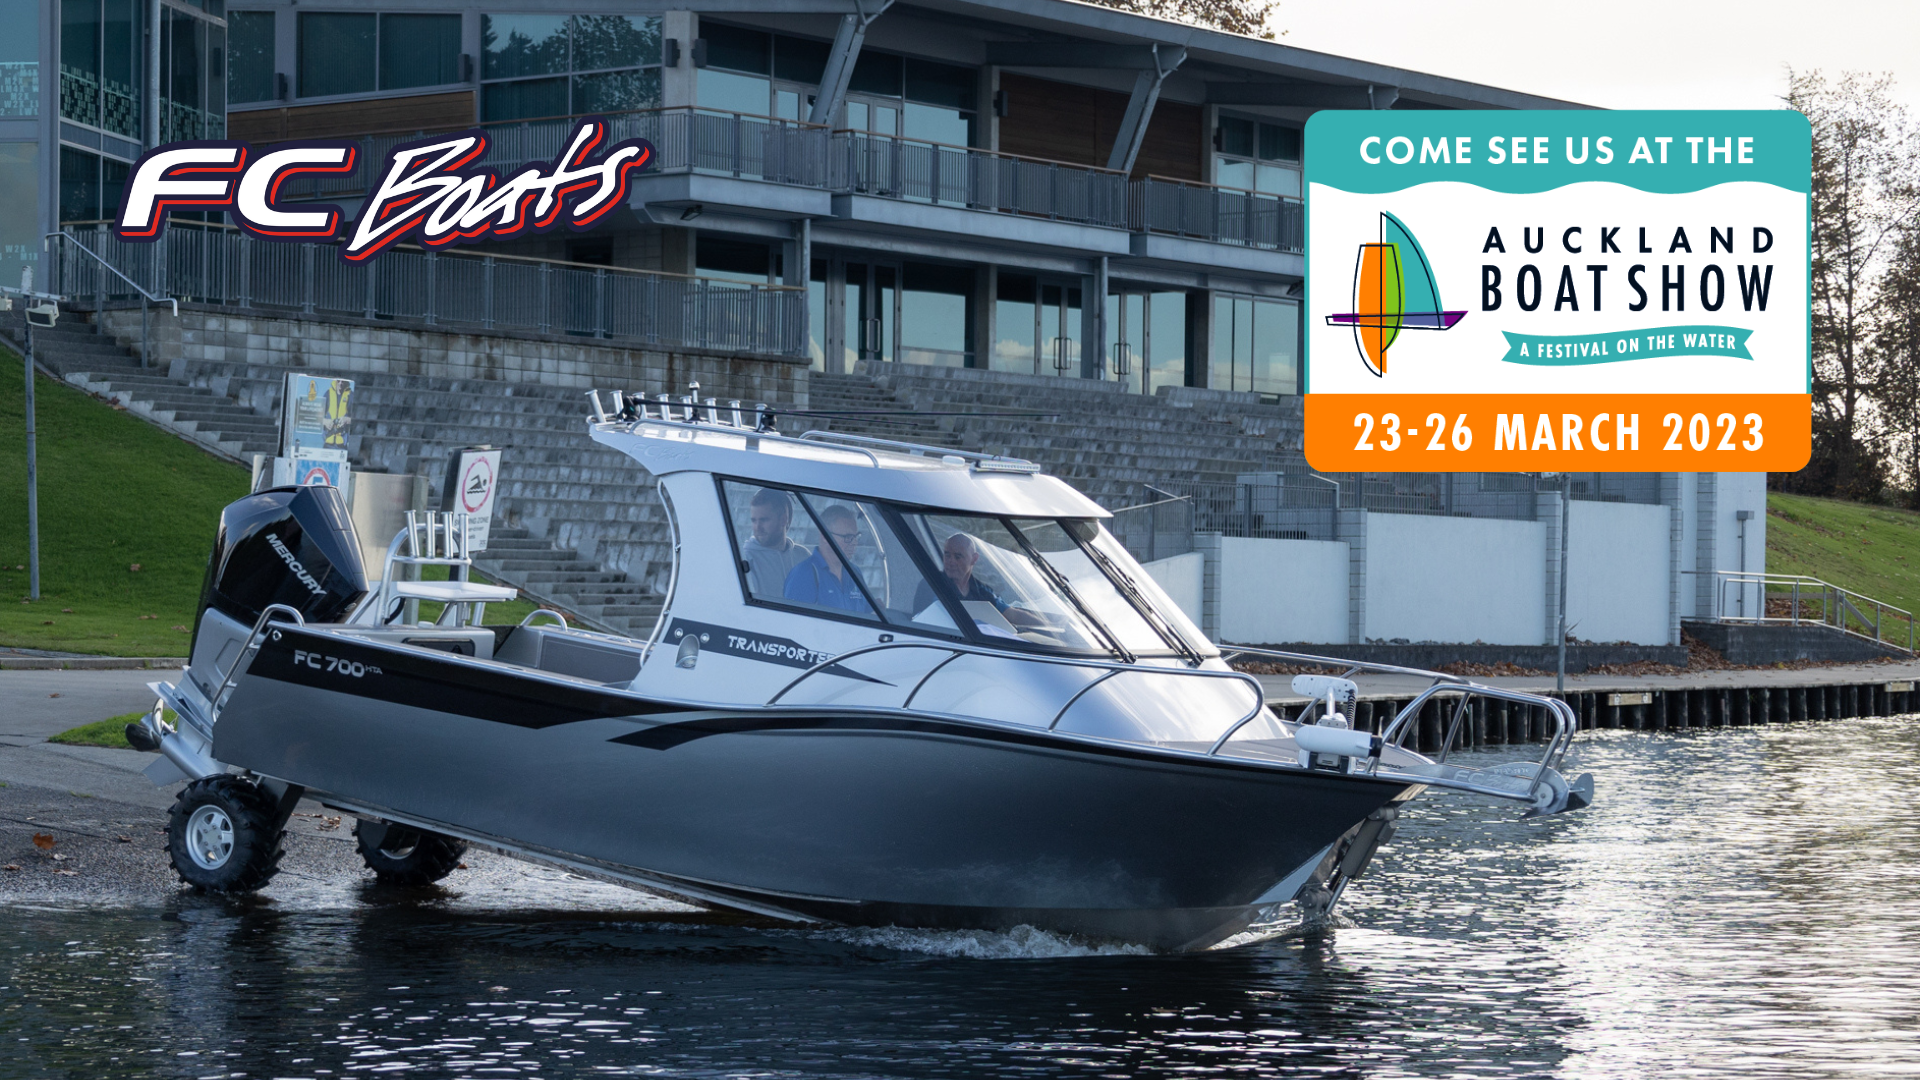 See us at the Auckland Boat Show